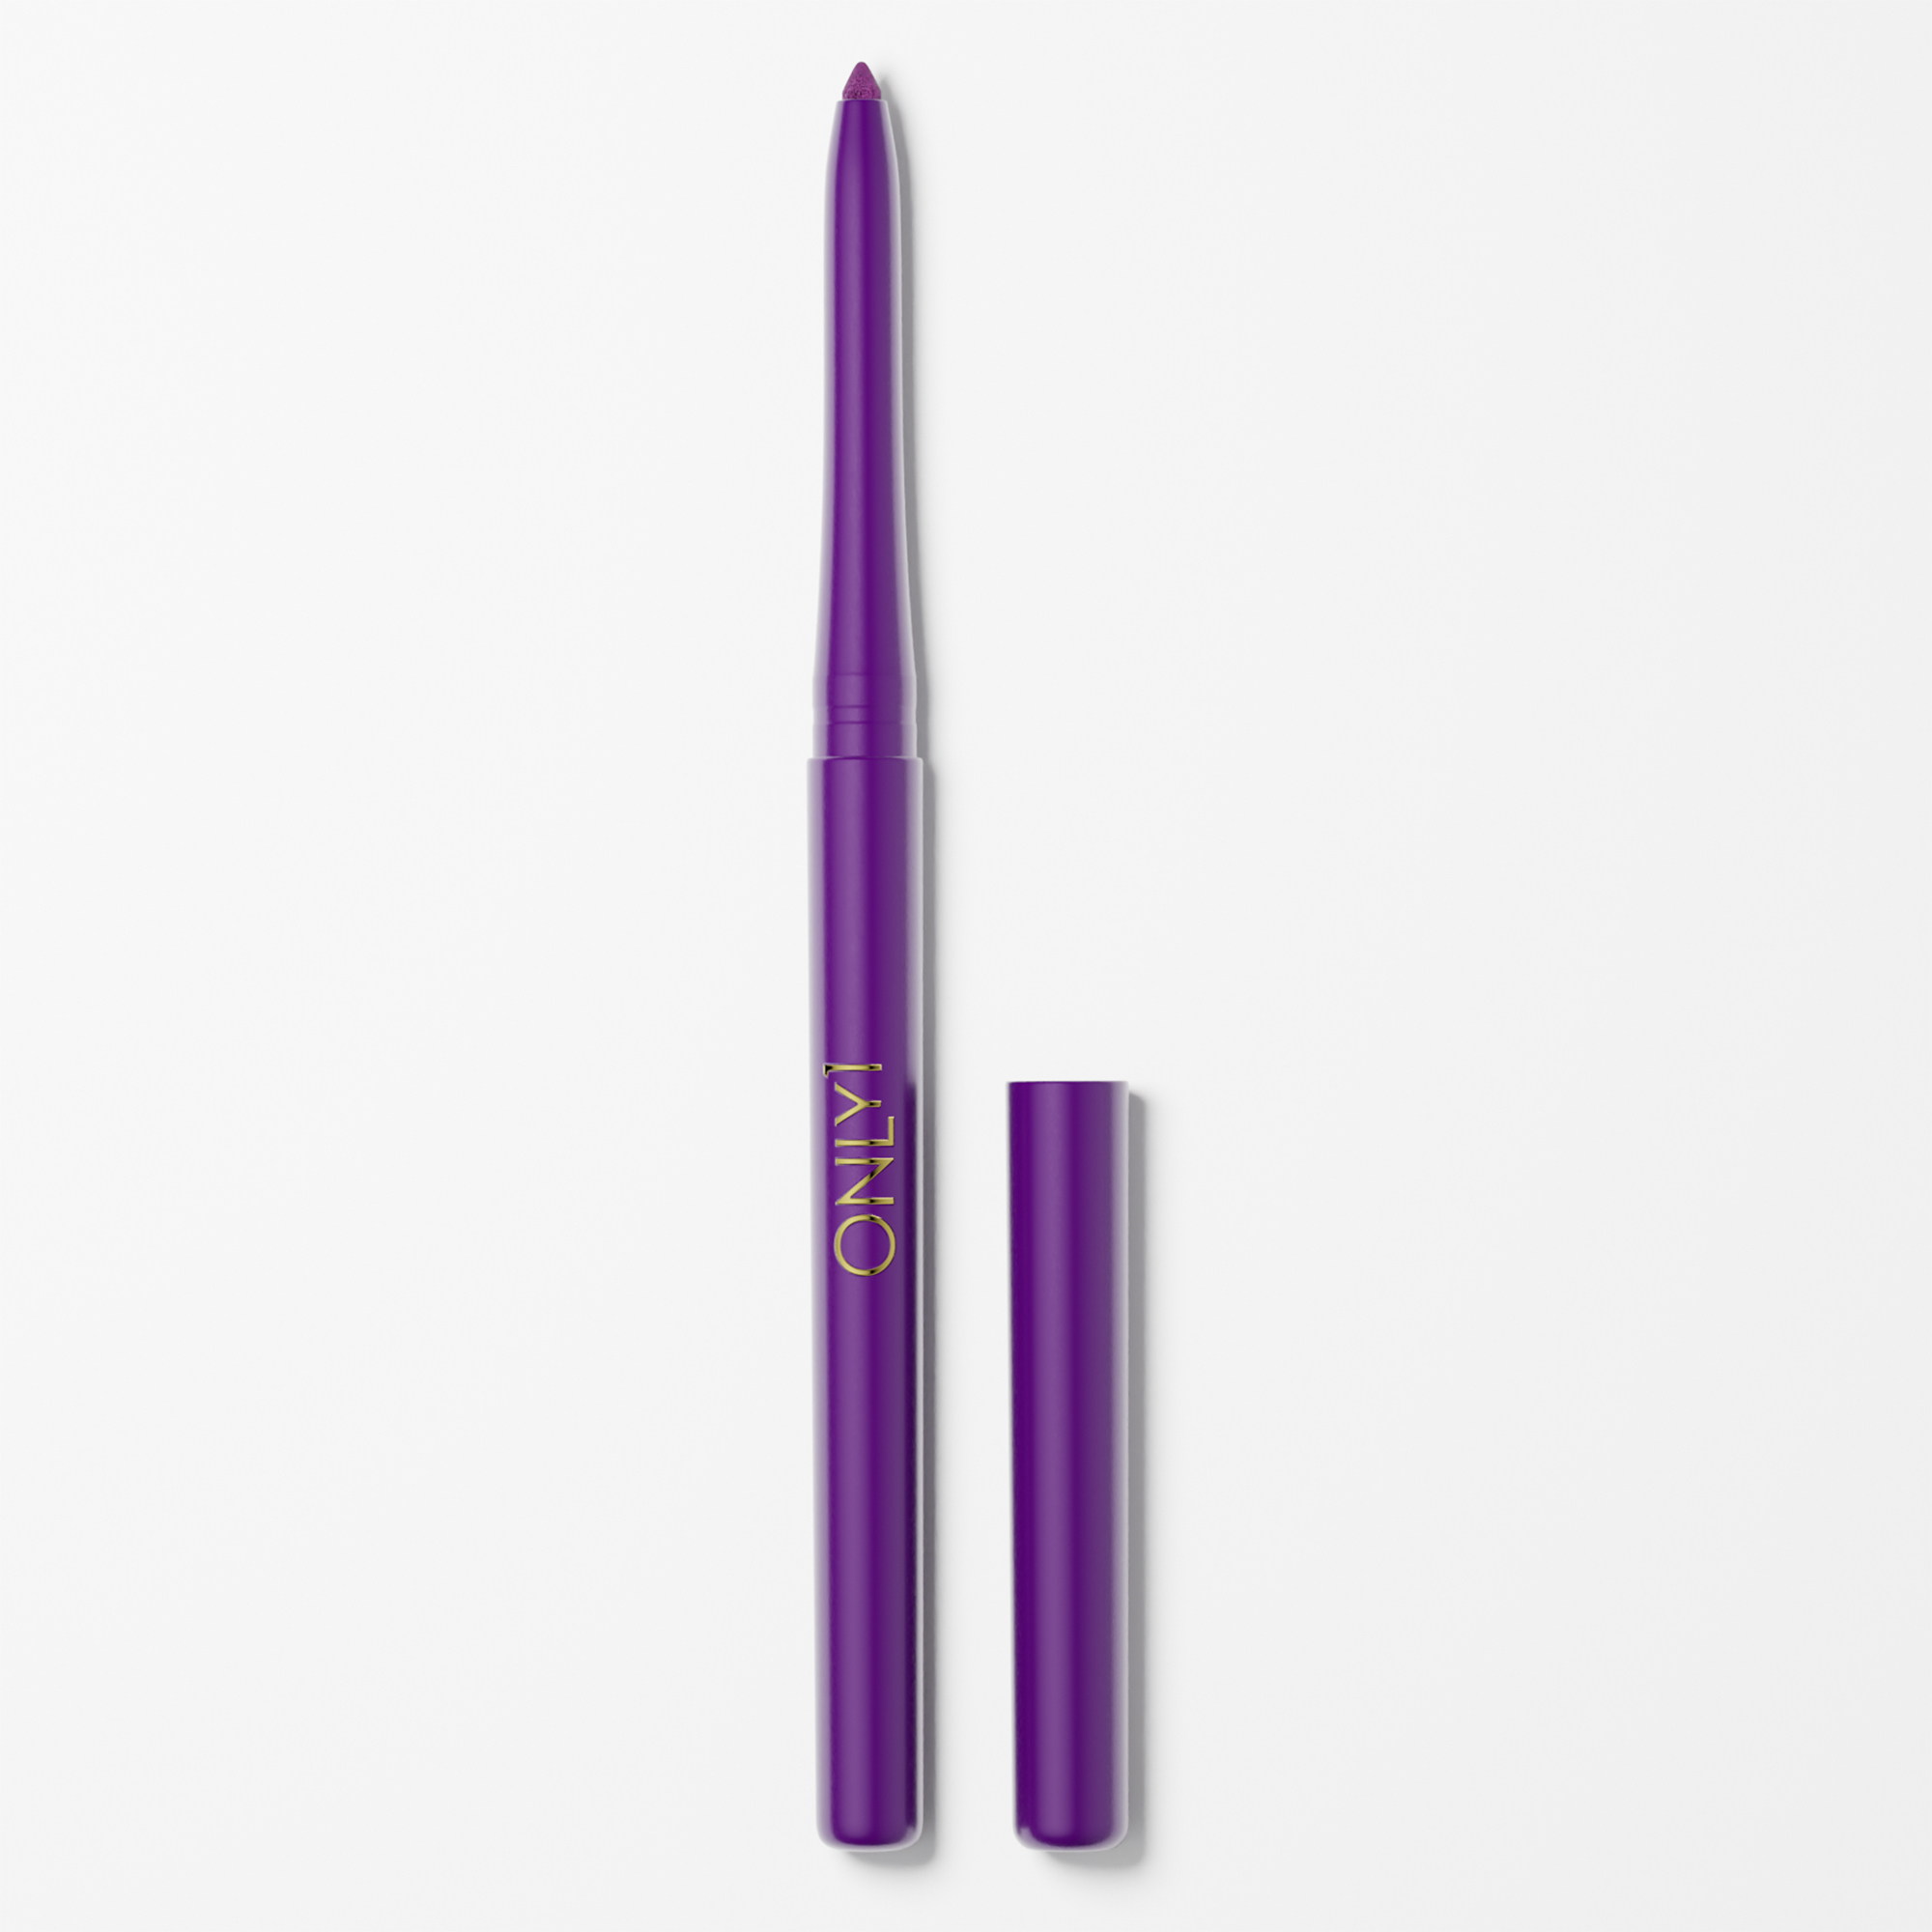 Retractable Eyeliner liner with a purple casing and dark tip, shown with the cap removed, on a plain white background.